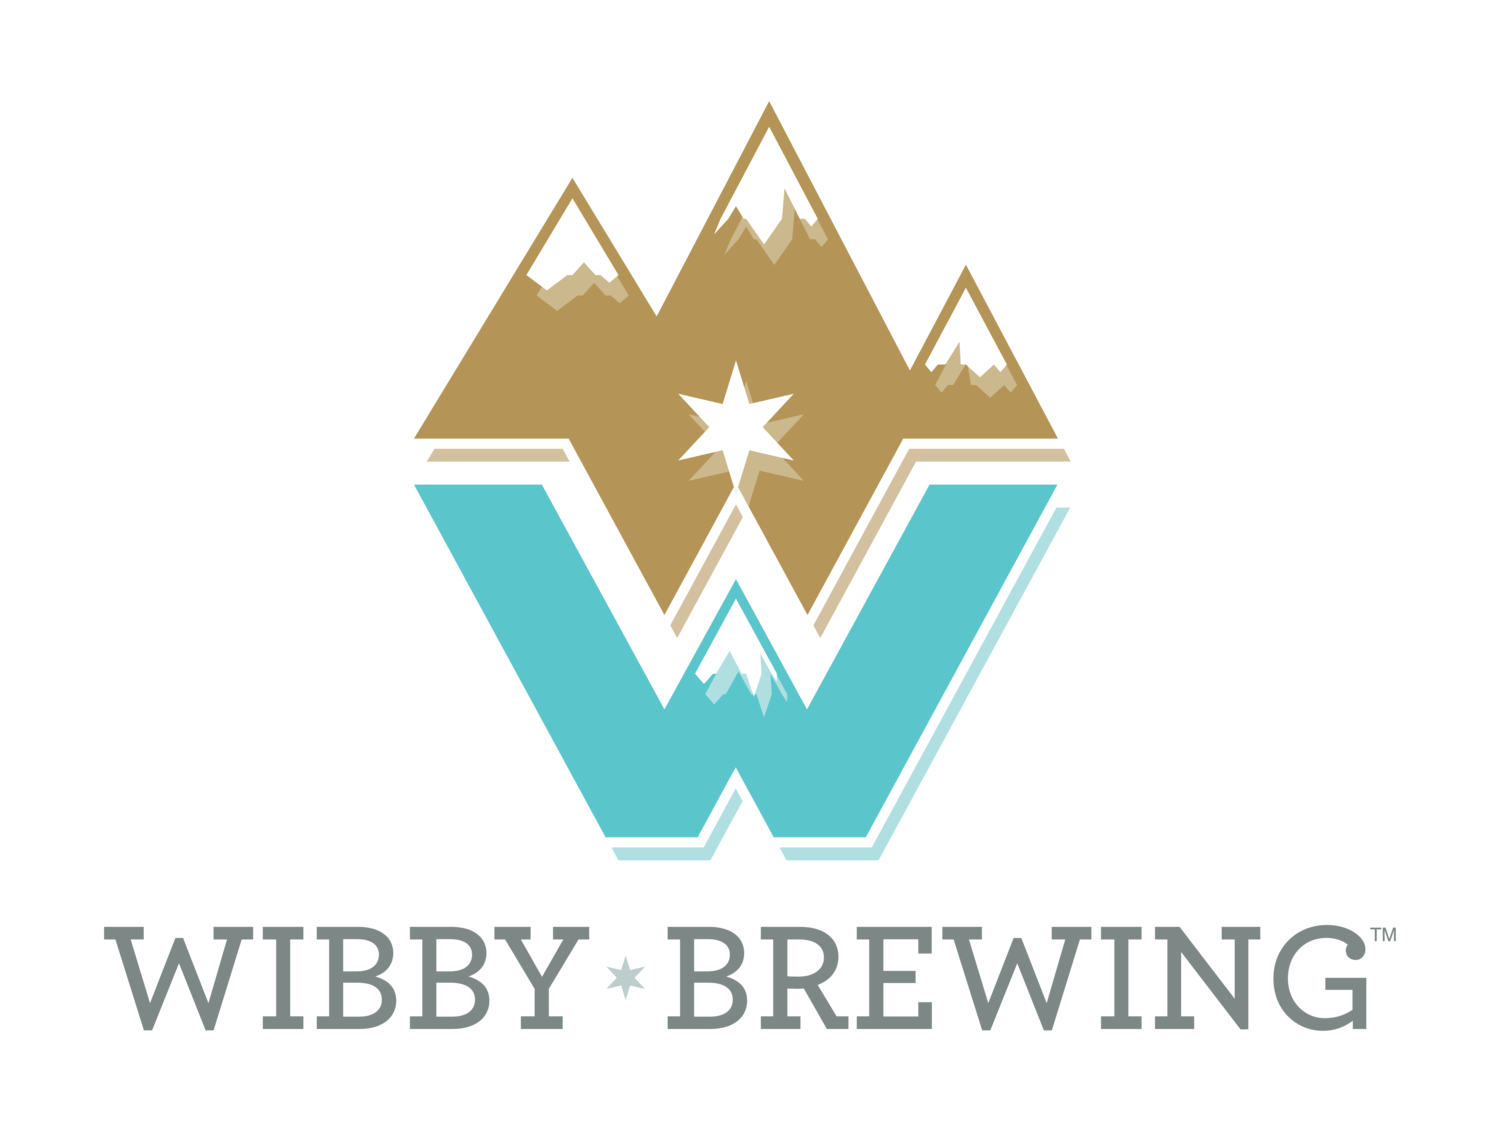 Check out Local Craft Breweries